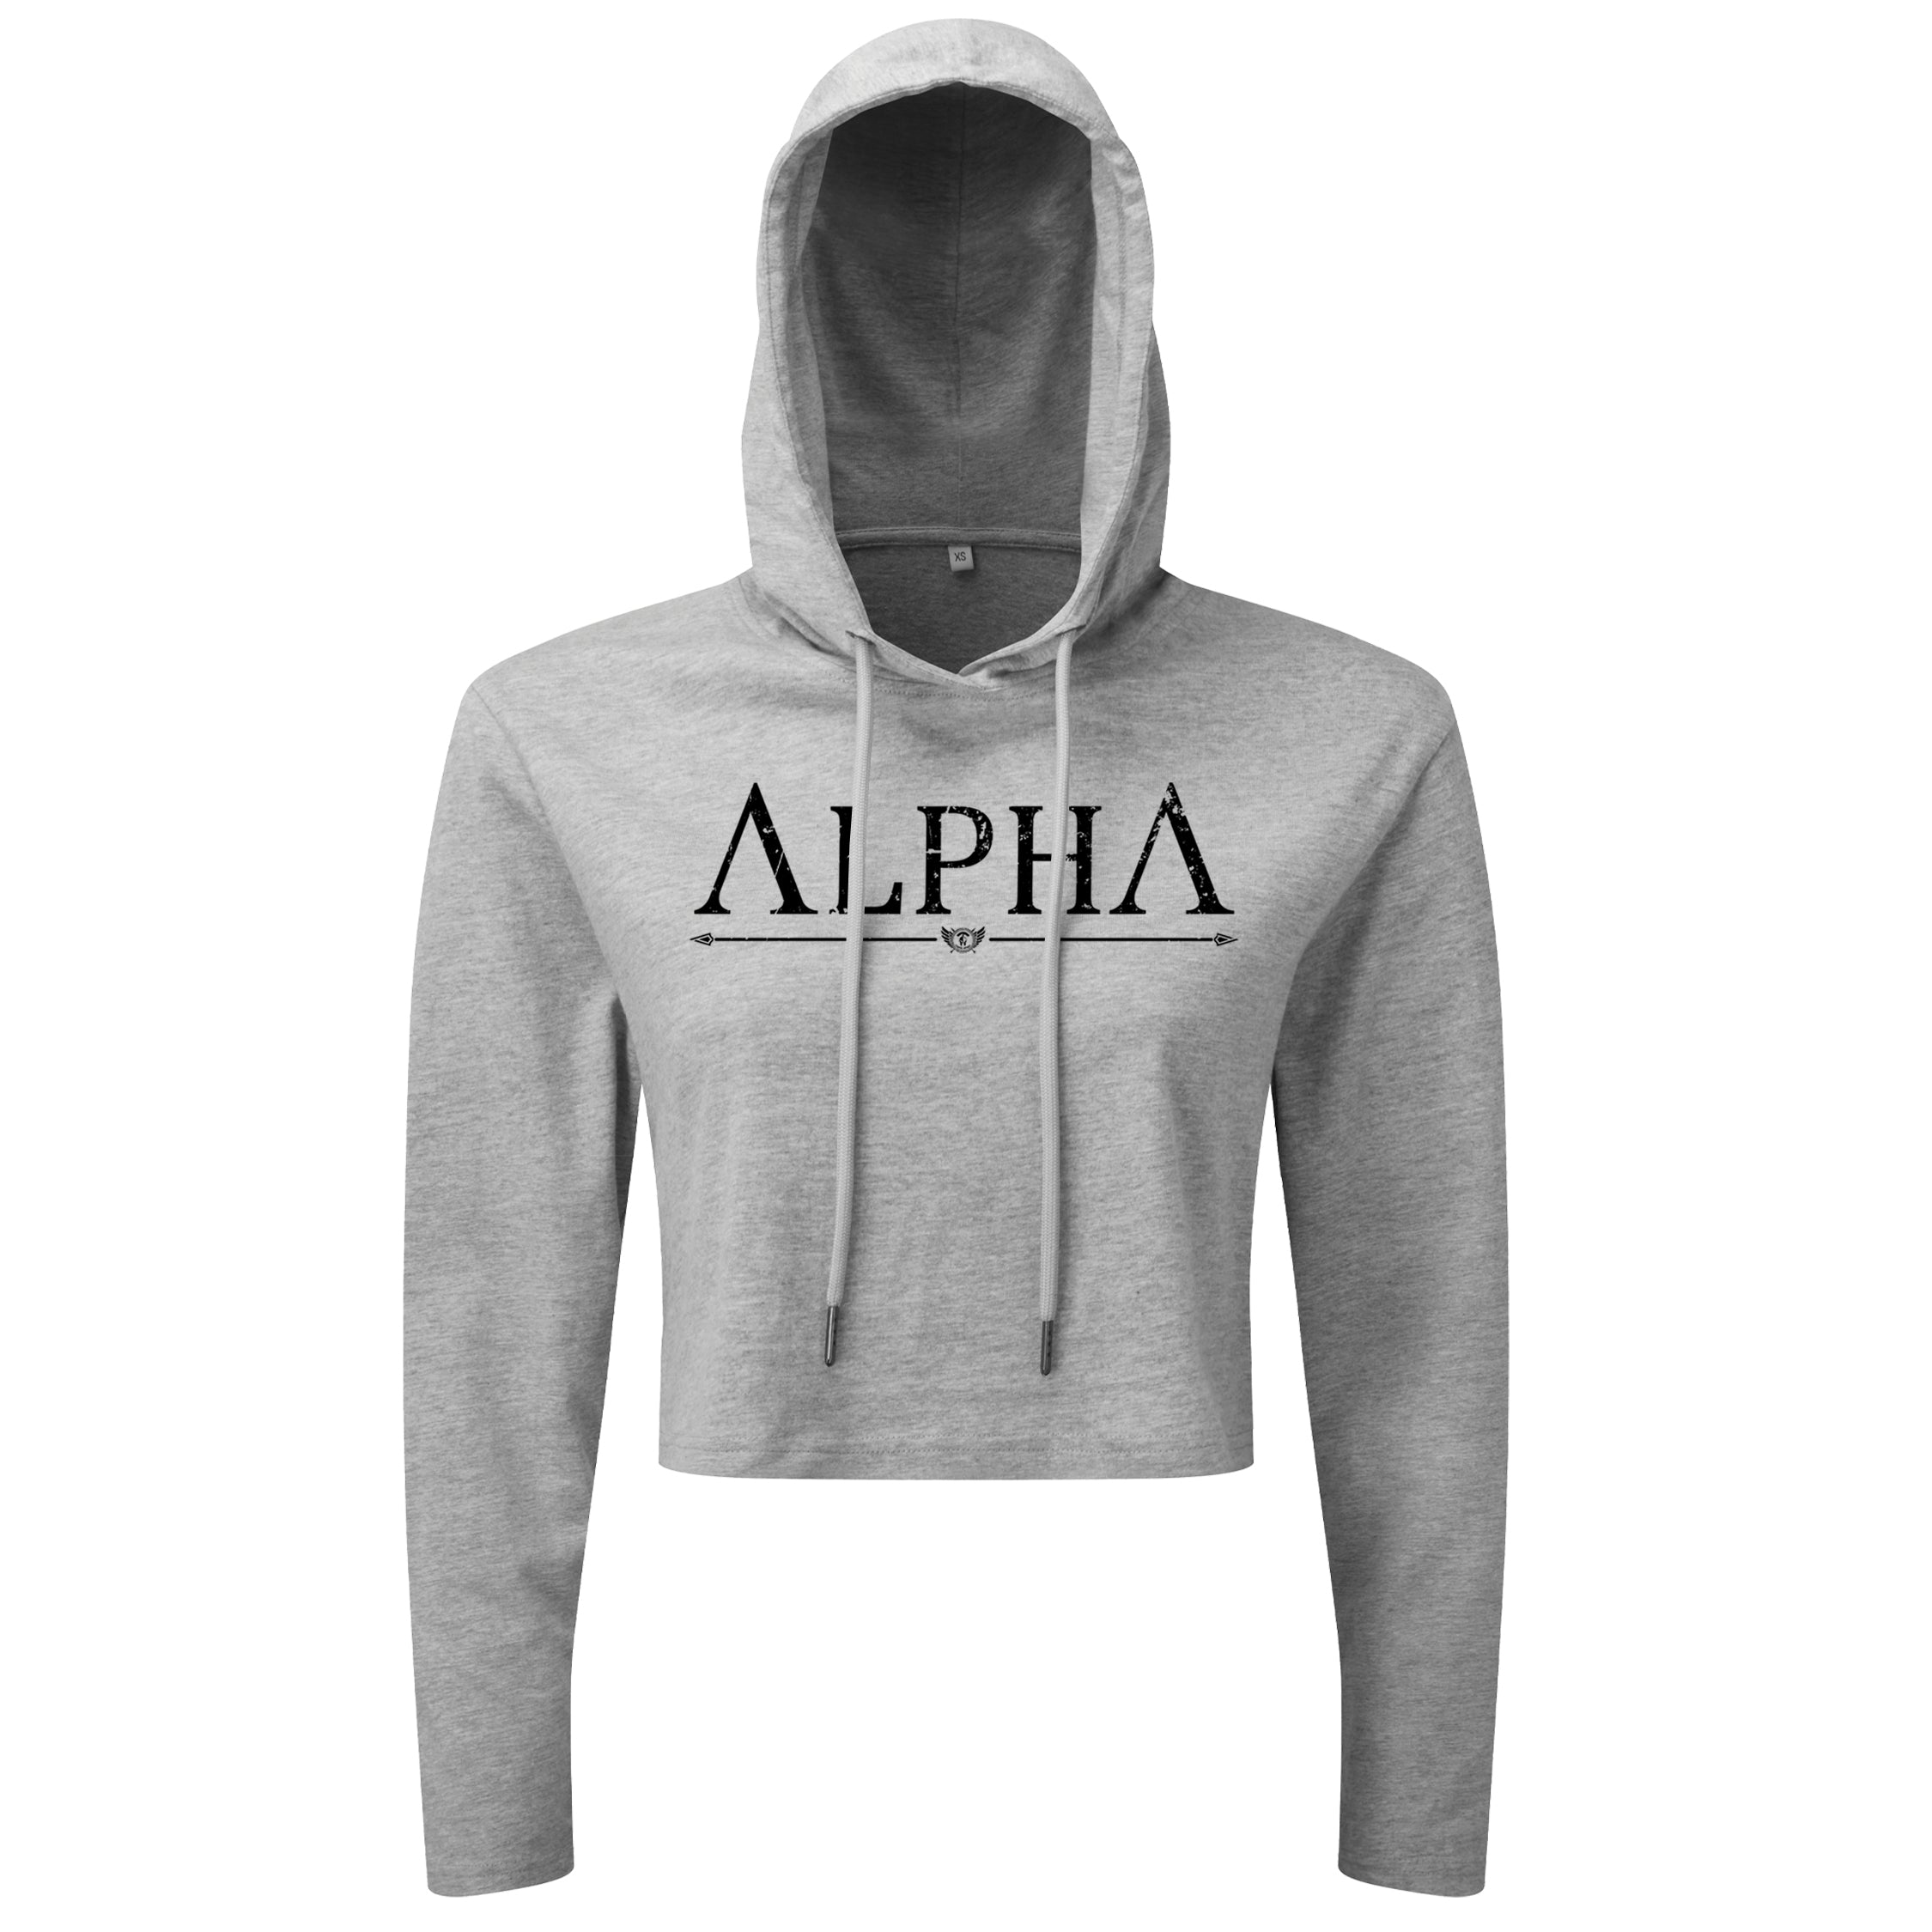 ALPHA - Spartan Forged - Cropped Hoodie